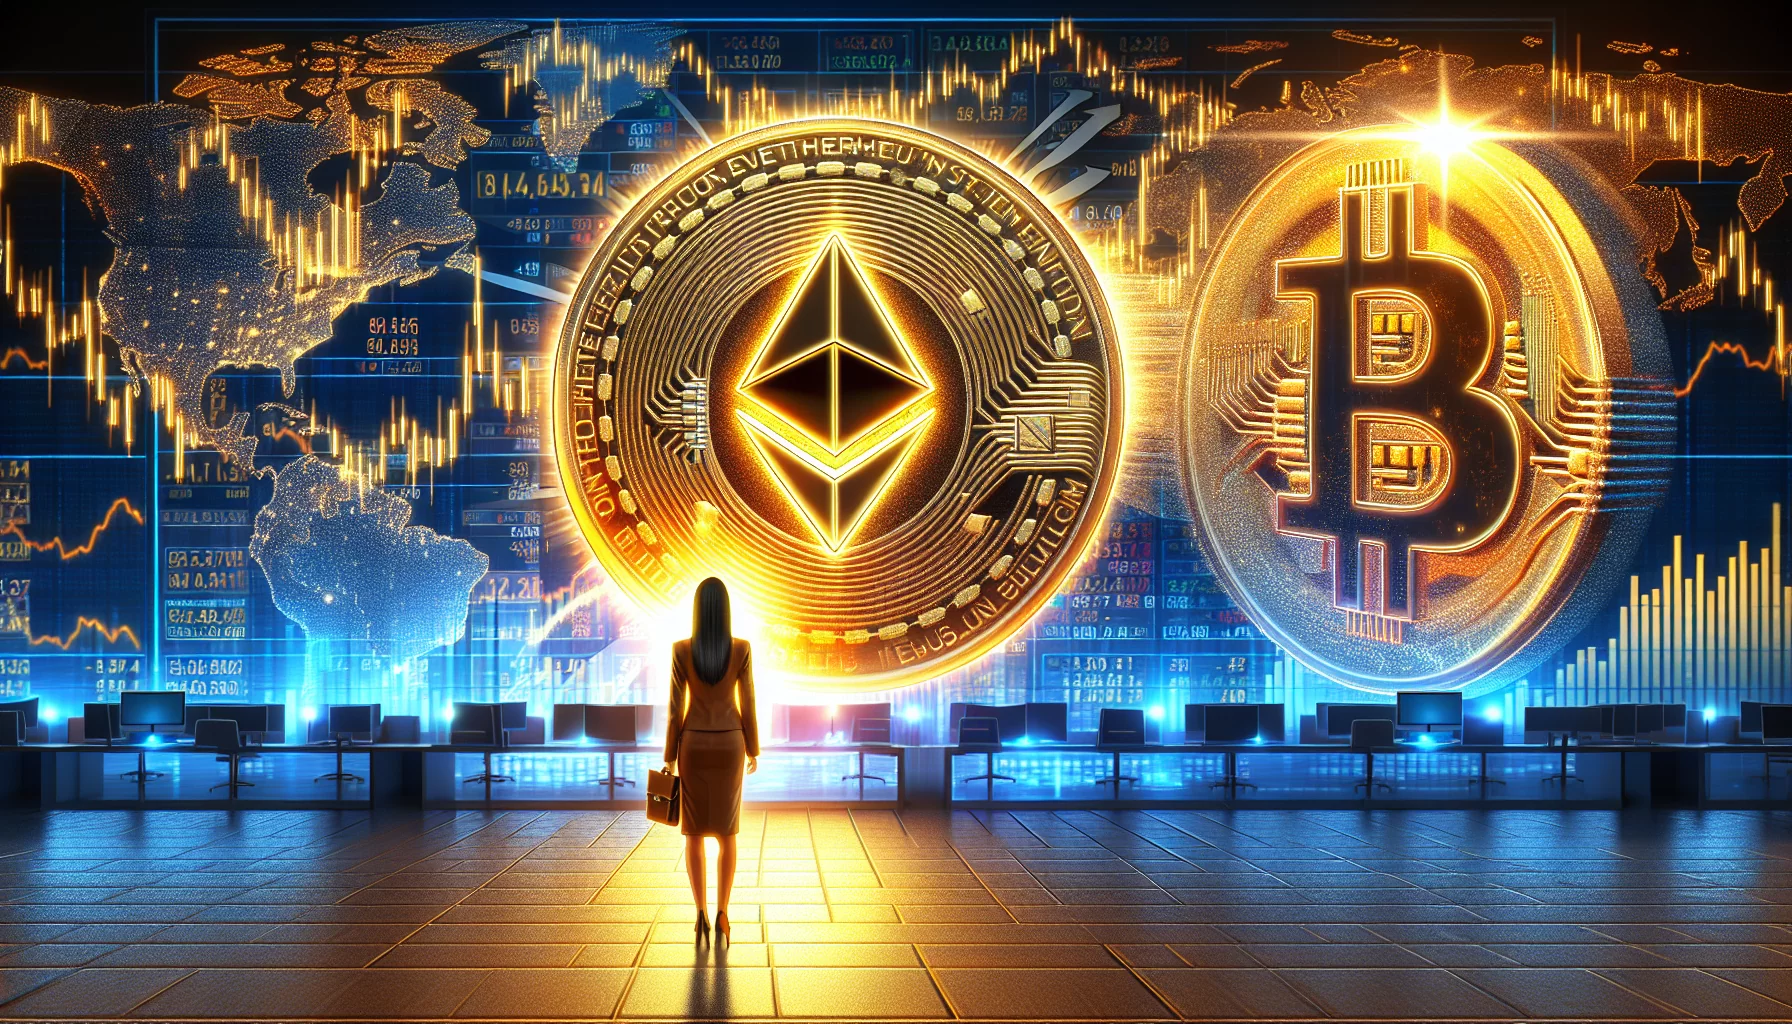 Ethereum: the most bullish altcoin outshining Bitcoin in the cryptocurrency market